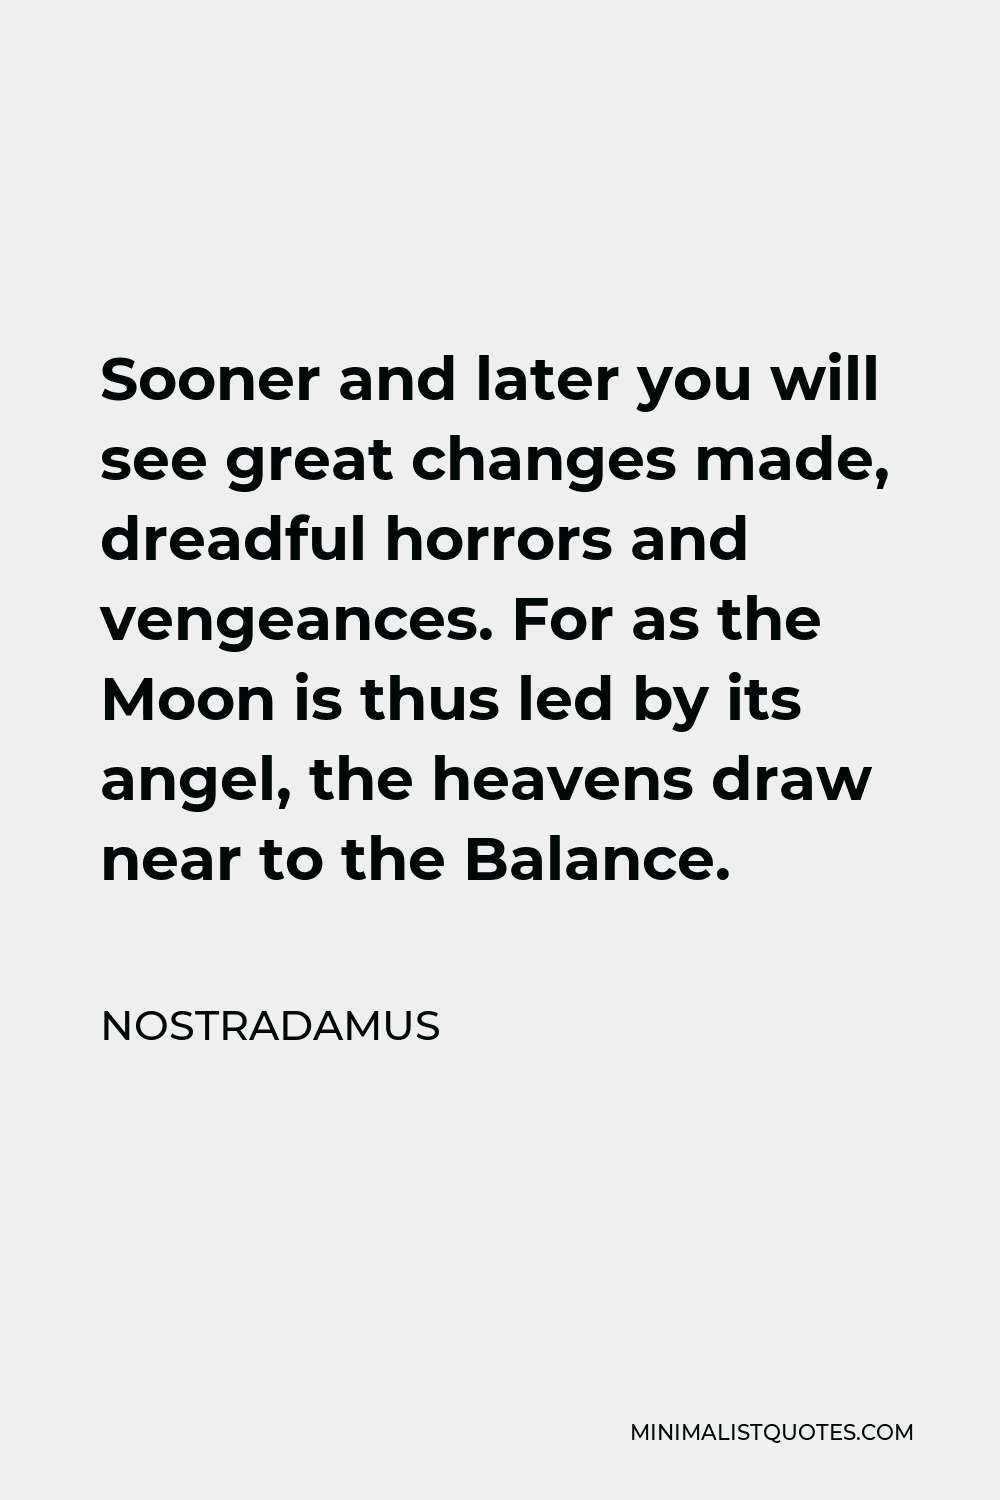 Nostradamus Quote - Sooner and later you will see great changes made, dreadful horrors and vengeances. For as the Moon is thus led by its angel, the heavens draw near to the Balance.